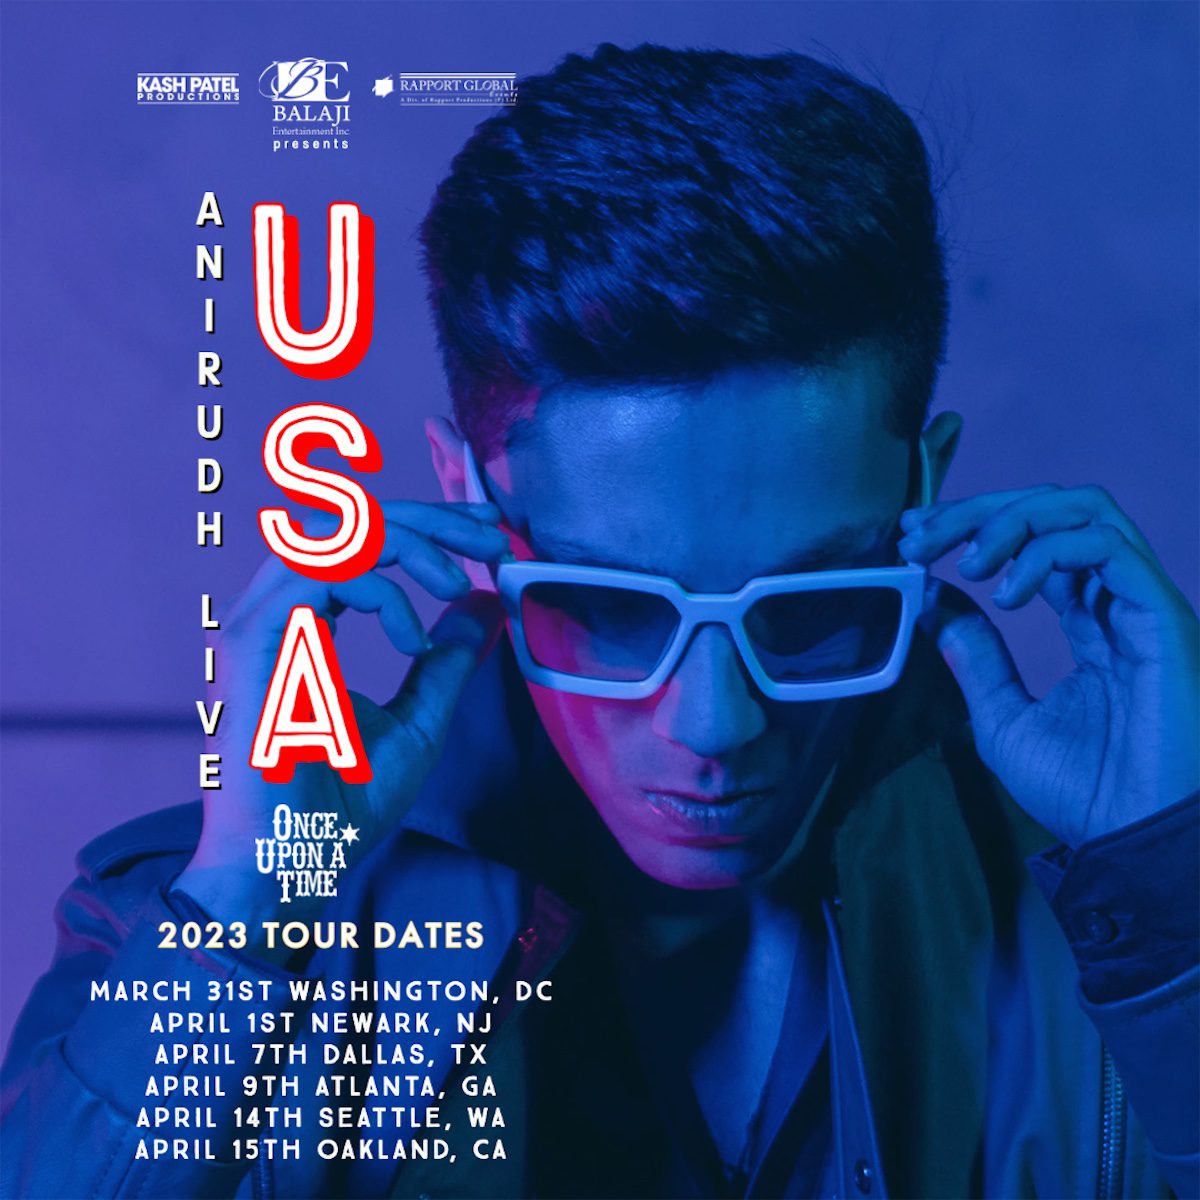 Kash Patel Productions Anirudh Once Upon A Time USA Tour 2023 2